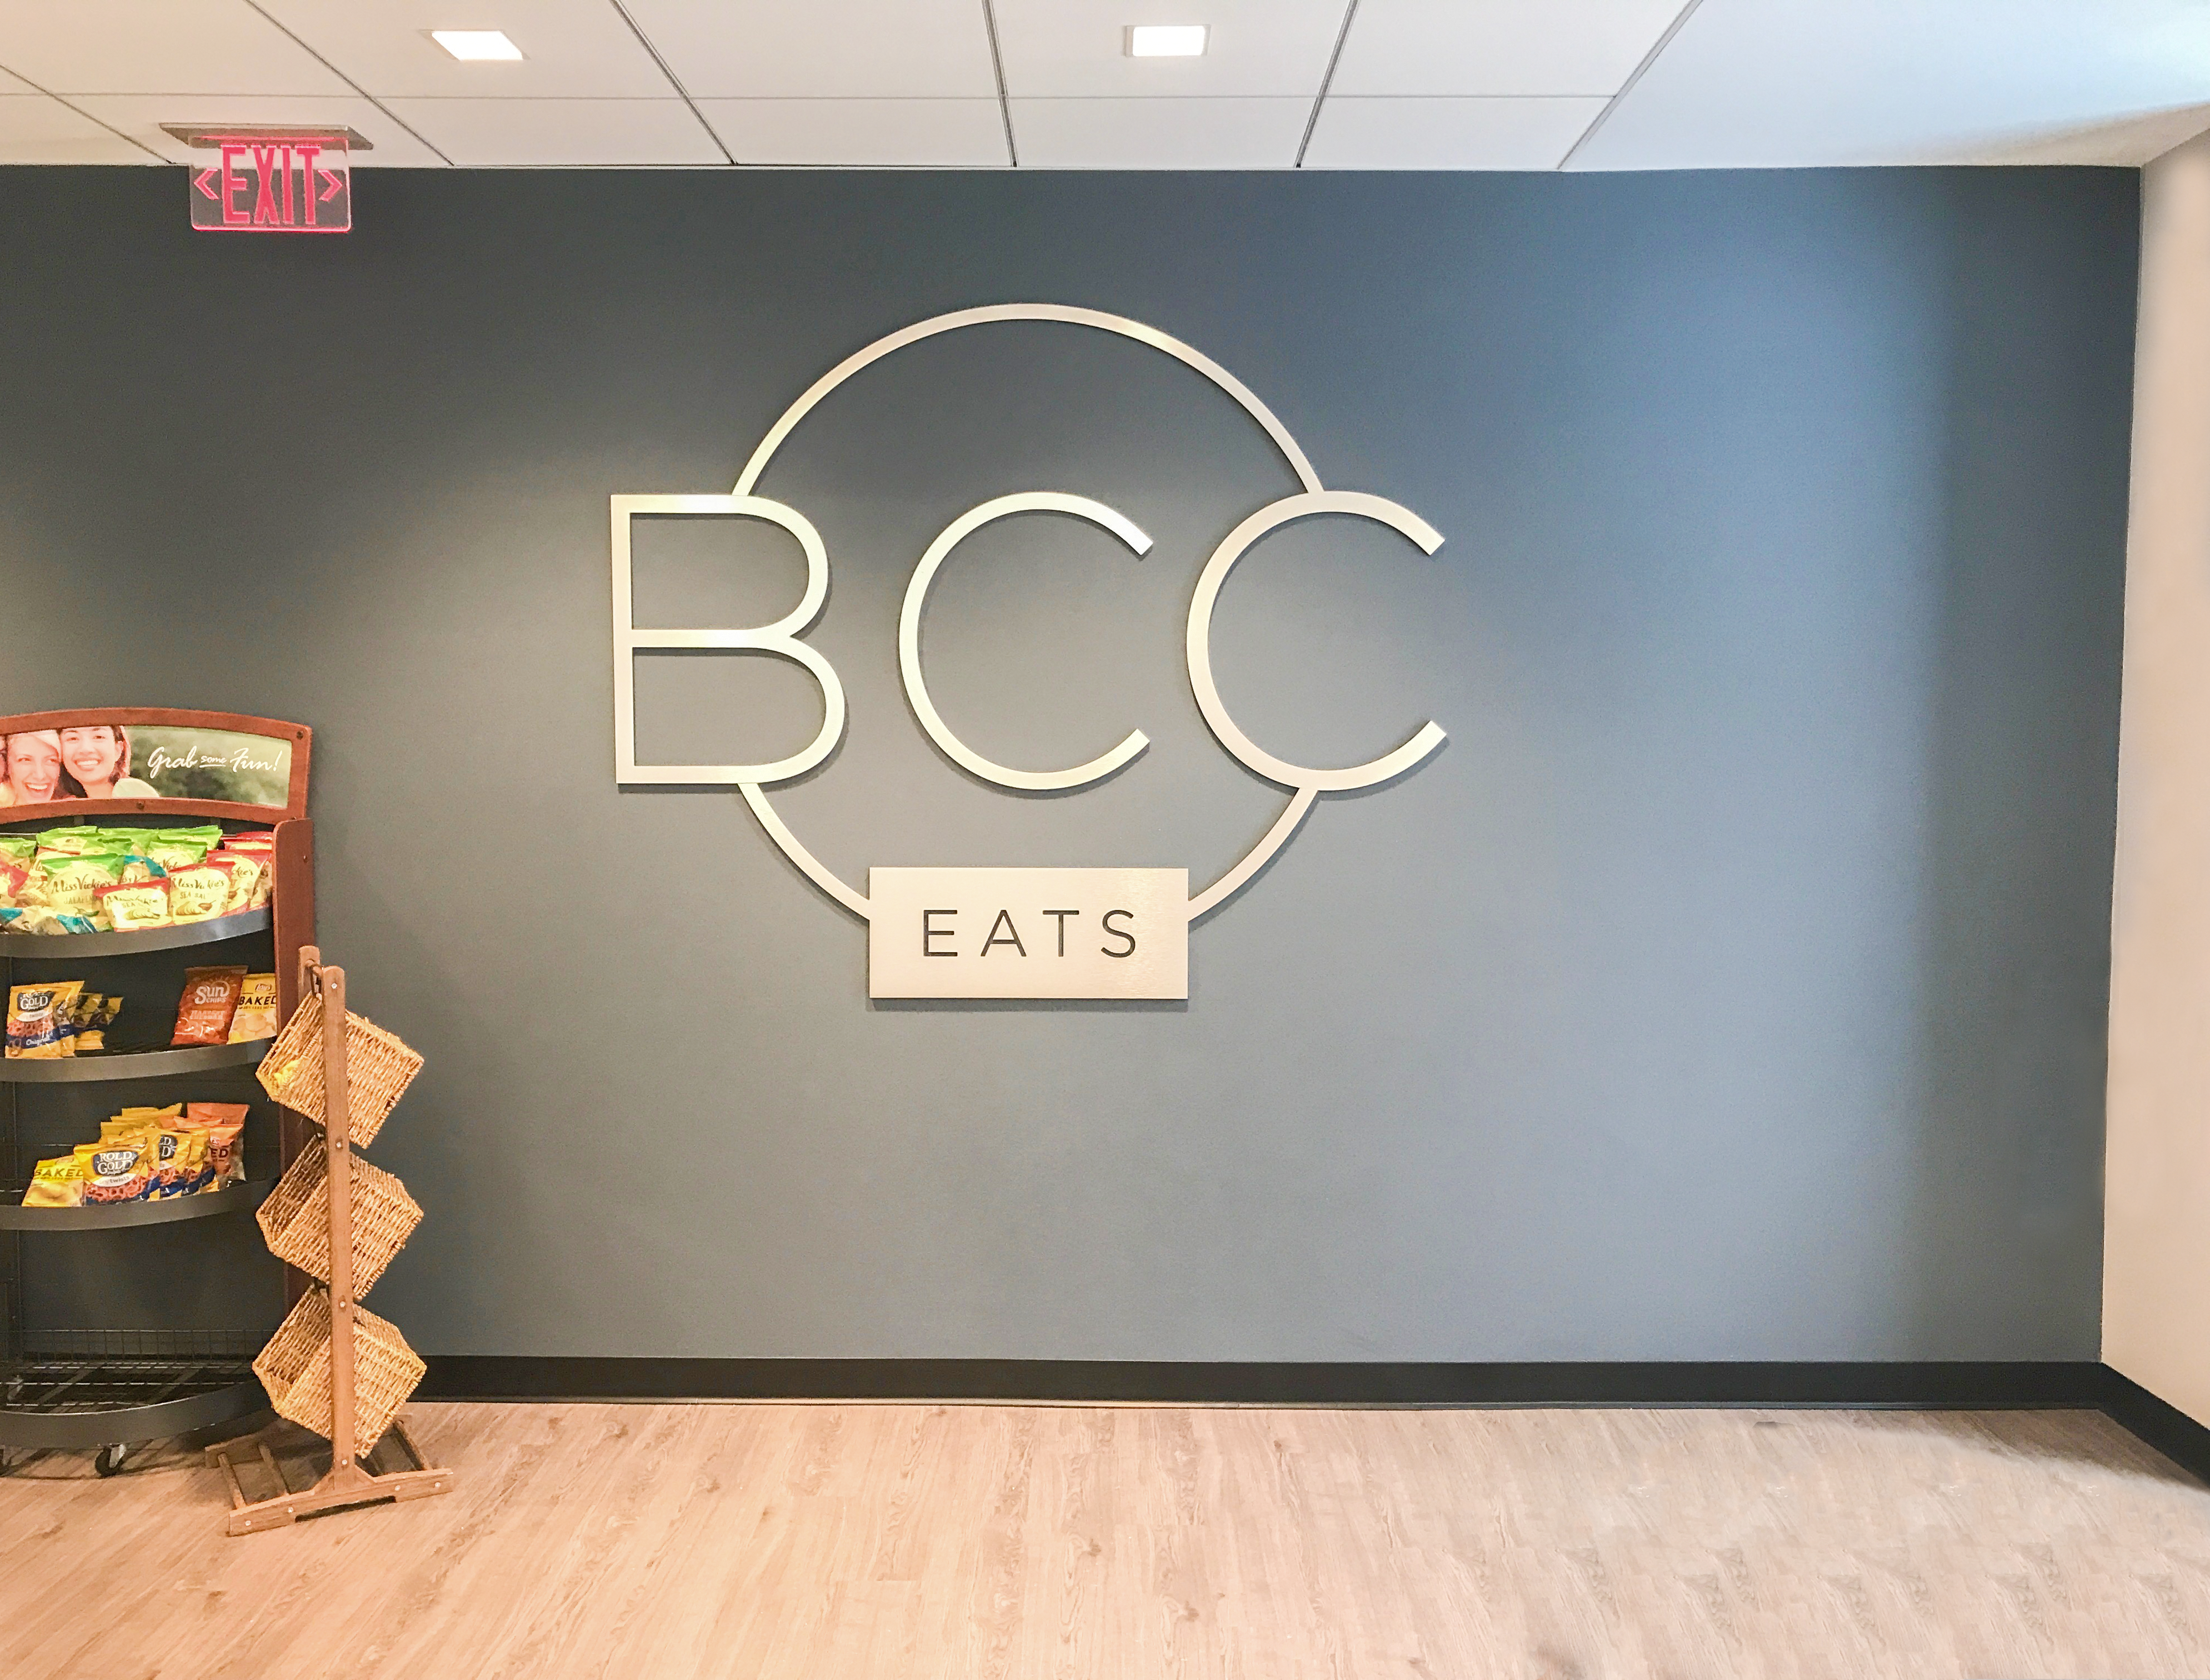 A wall sign for BCC Eats